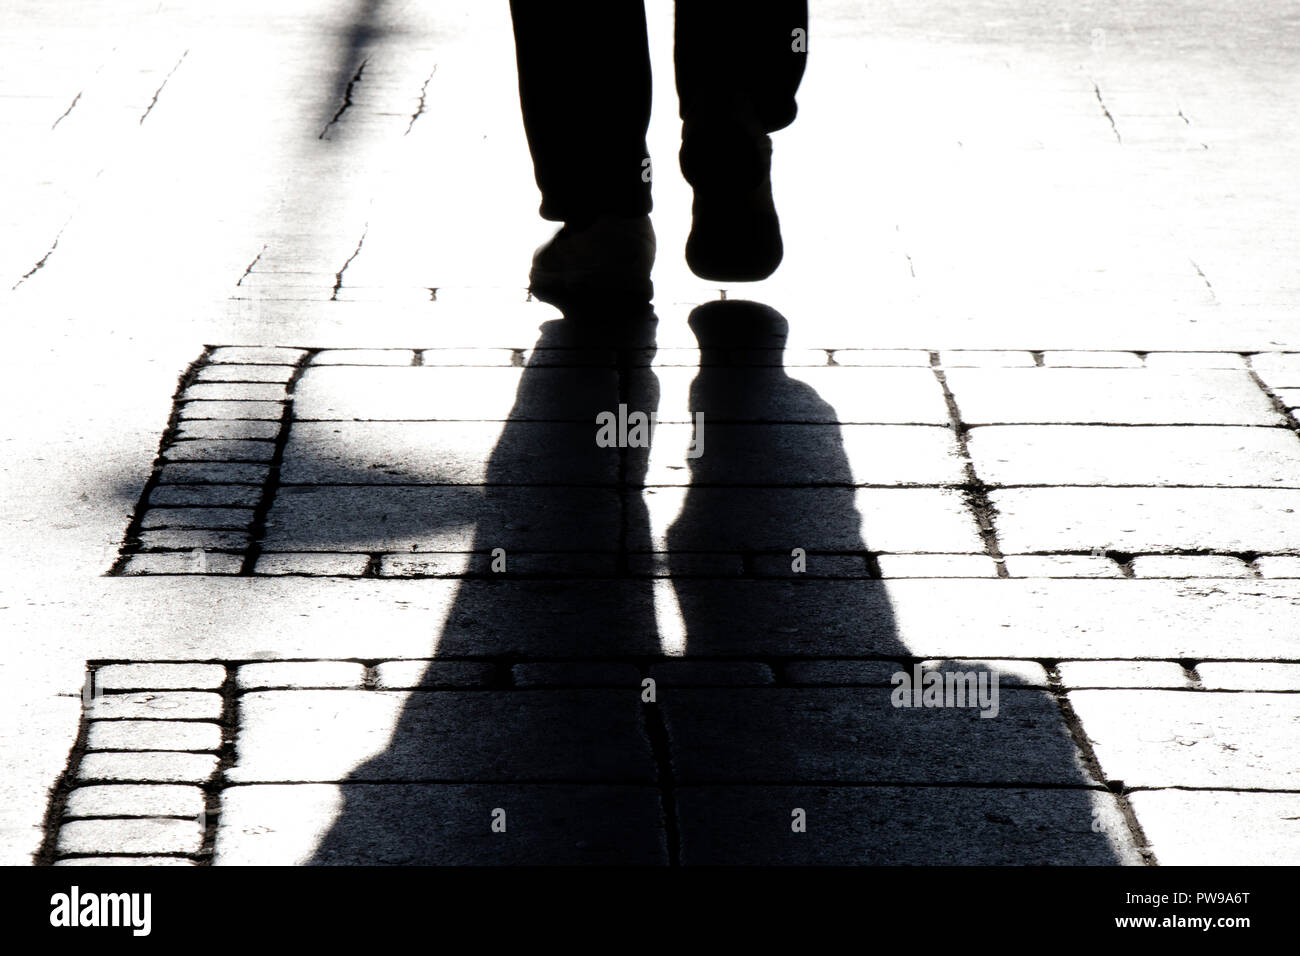 Blurry silhouette shadows of a person legs walking on city street sidewalk in black and white Stock Photo